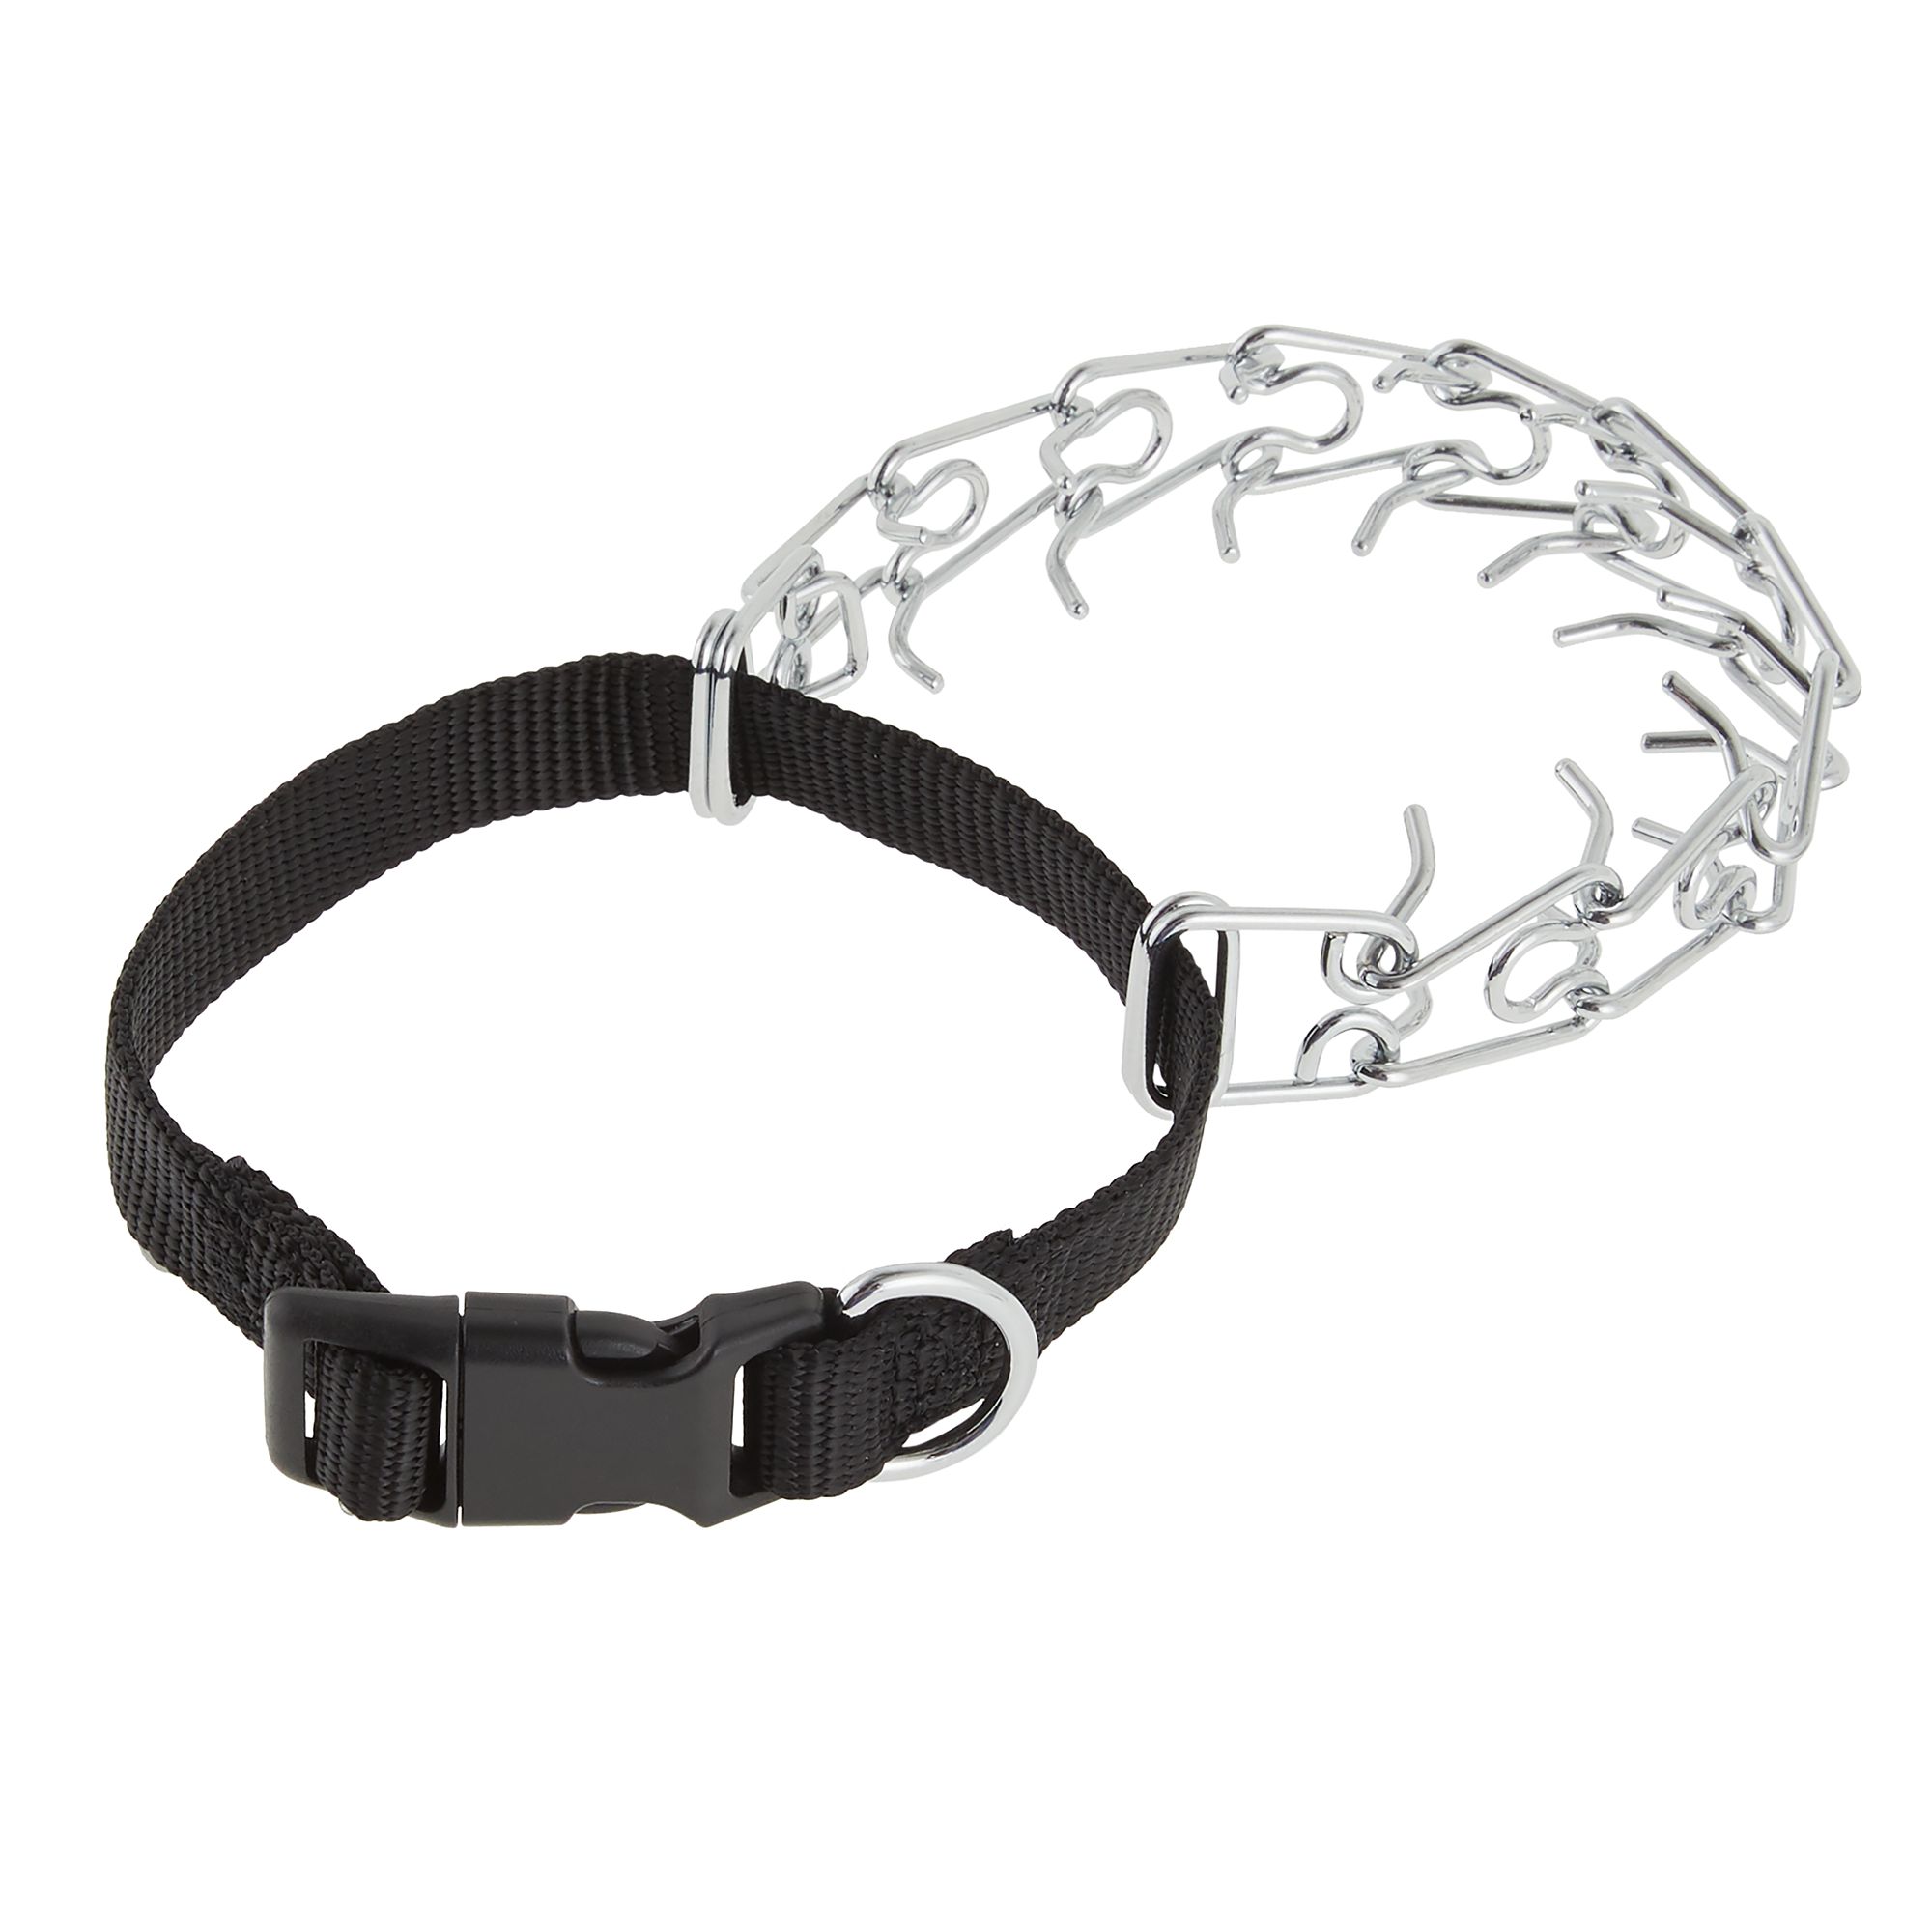 Top Paw Buckle Prong Training Dog Collar, Size: Small | PetSmart